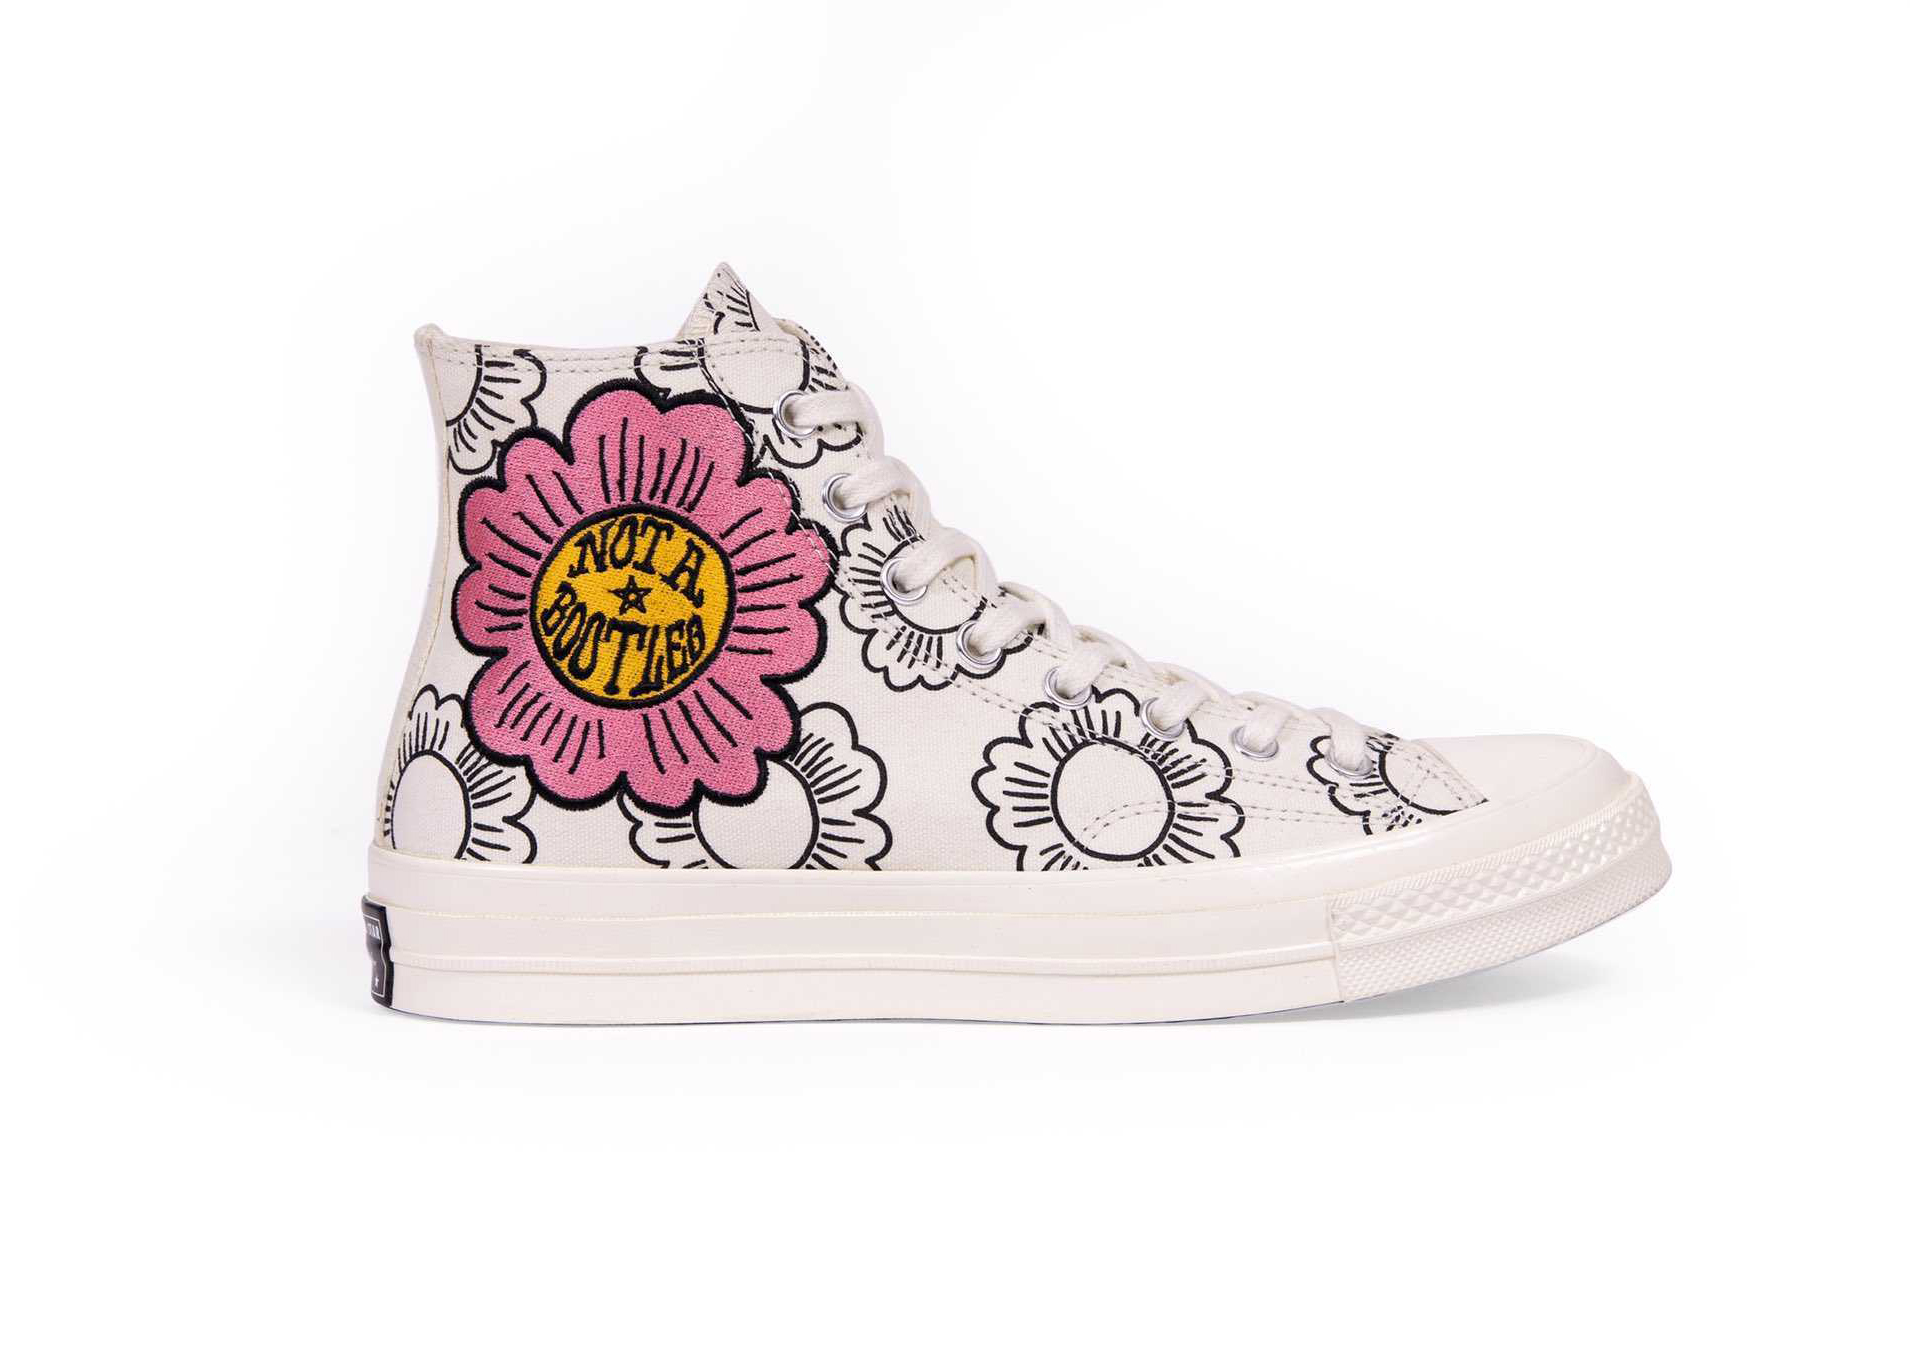 Pre-owned Converse Chuck Taylor All Star 70 Hi Joe Freshgoods This Is Not A Bootleg (f&f) In Egret/pink/black